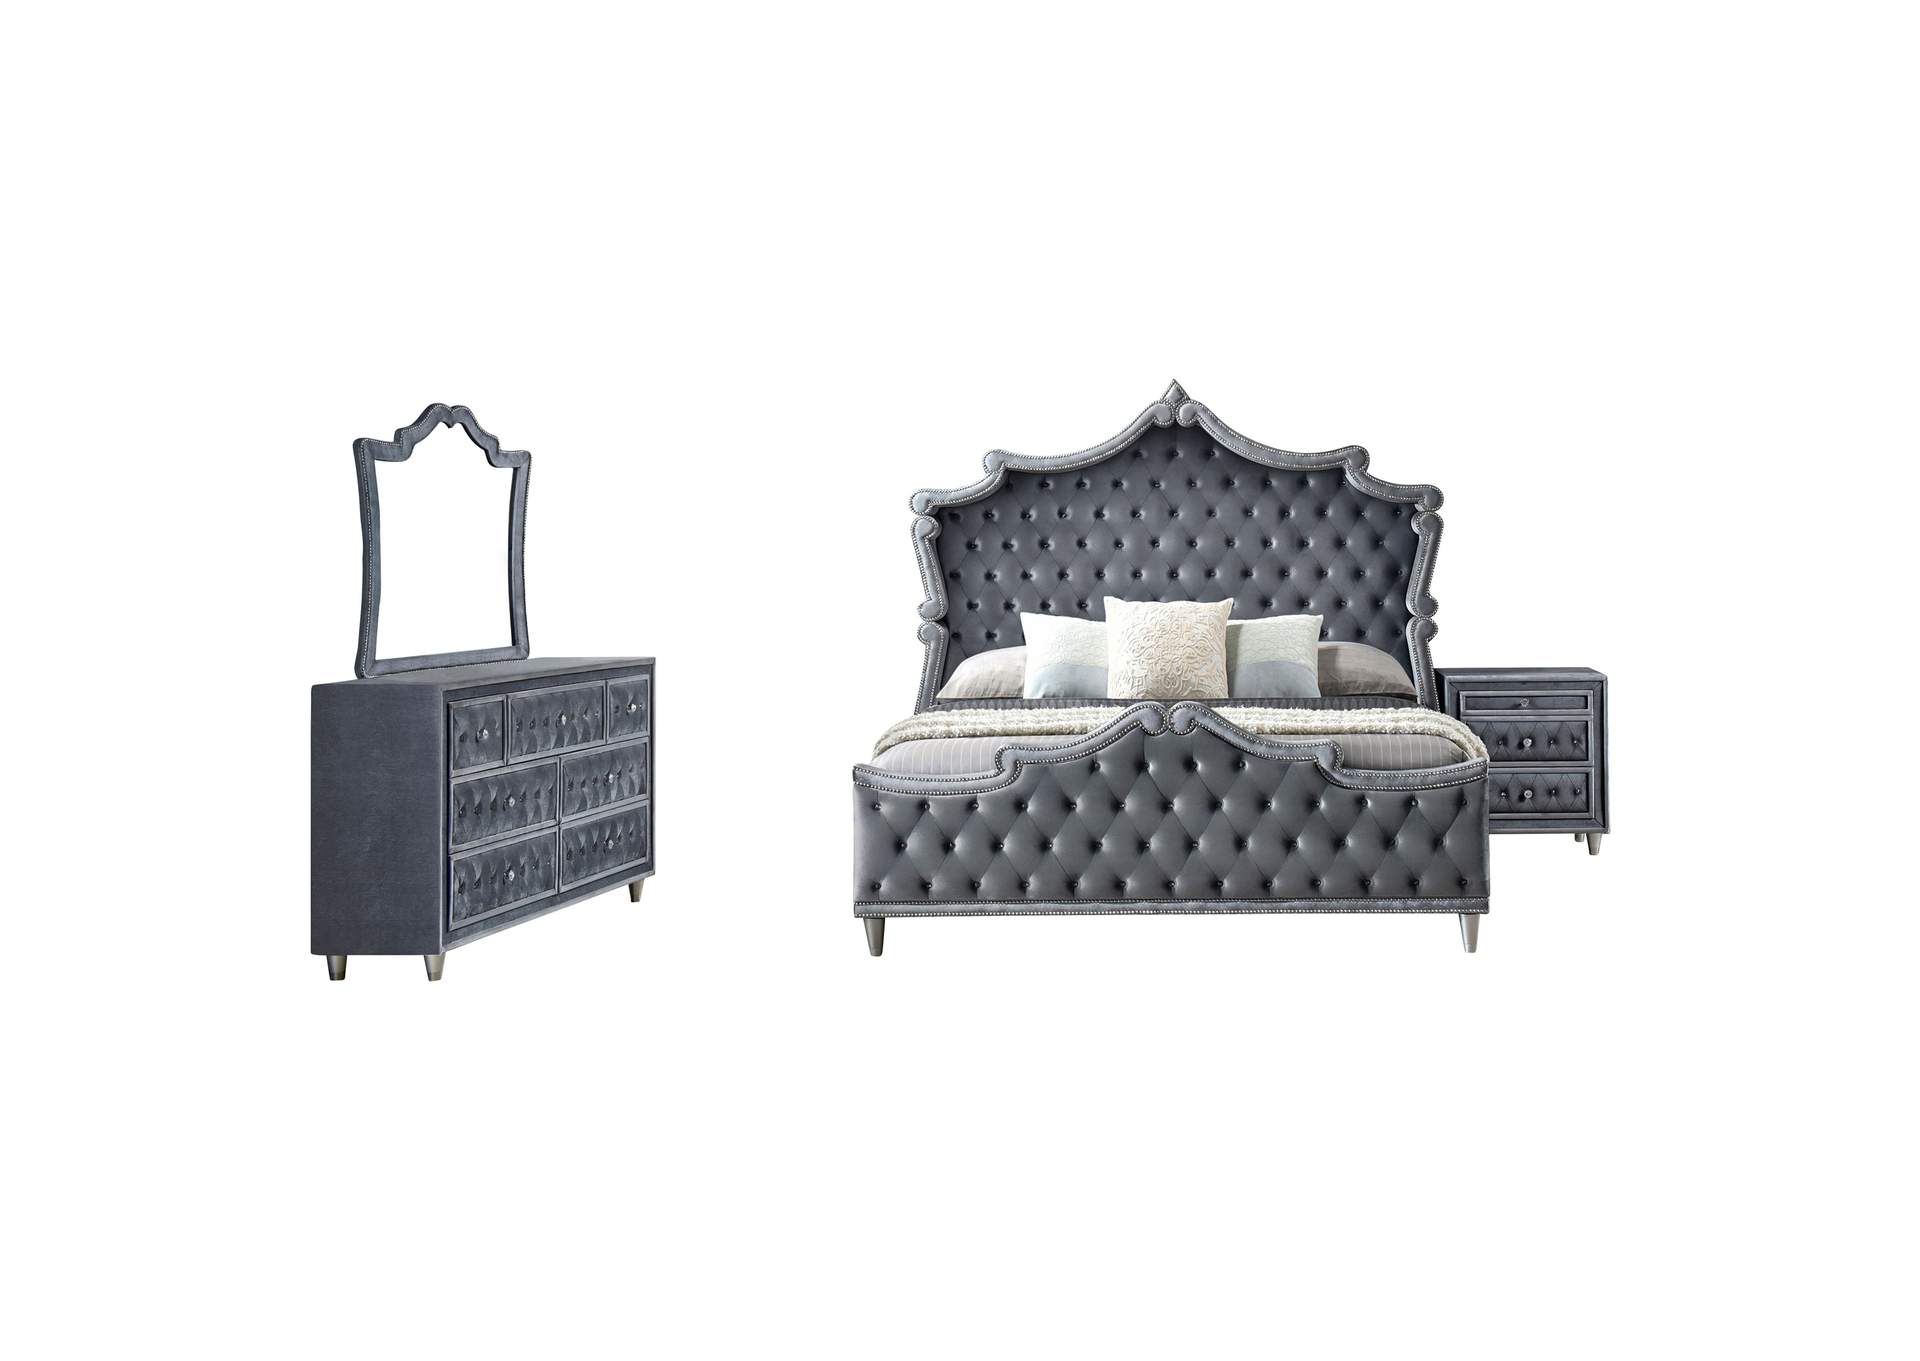 QUEEN BED 4 PC SET,Coaster Furniture